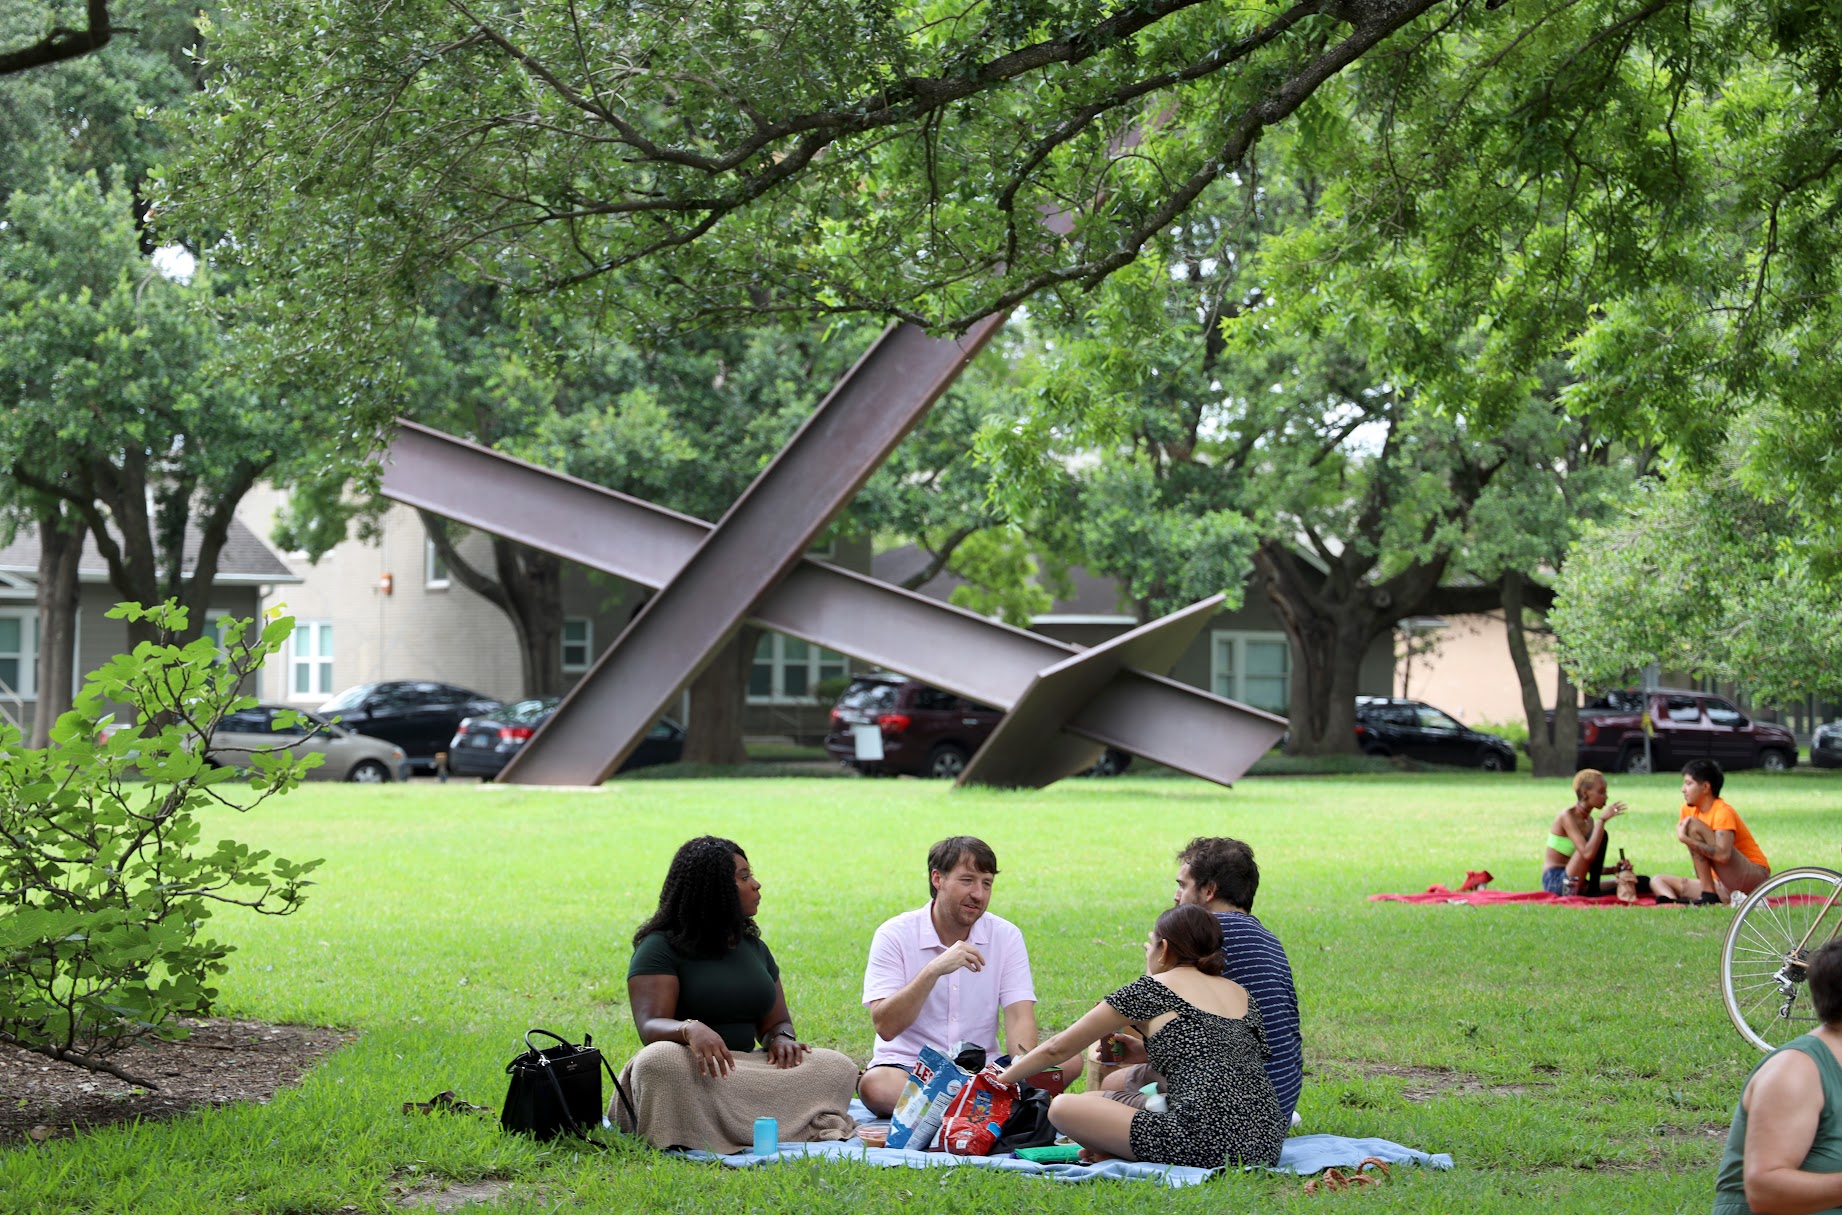 Scenic parks in Houston perfect for picnics and relaxing